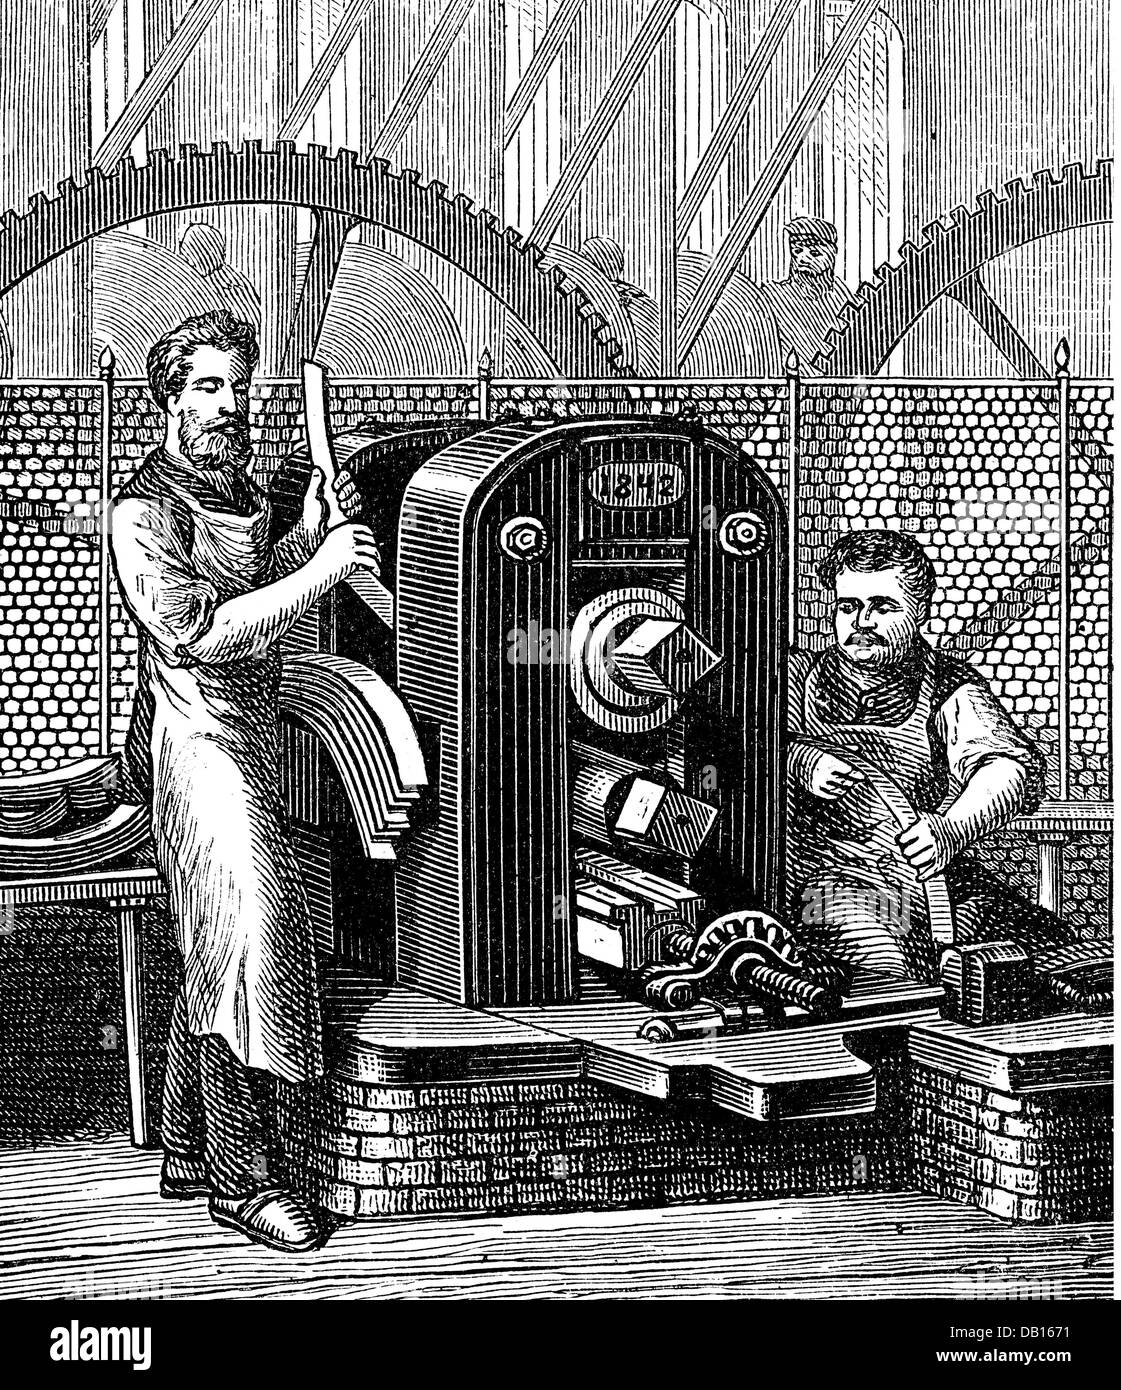 money / finances, mintage, machine for the stretching of the metal strips at the Royal Mint, Berlin, after Rob.Meinhardt, 1875, wood engraving, by Richard Brend'amour (1831 - 1915), from: 'Illustrirtes Konversations - Lexikon', Otto Spamer publishing house, Leipzig, 1870 - 1882, Additional-Rights-Clearences-Not Available Stock Photo